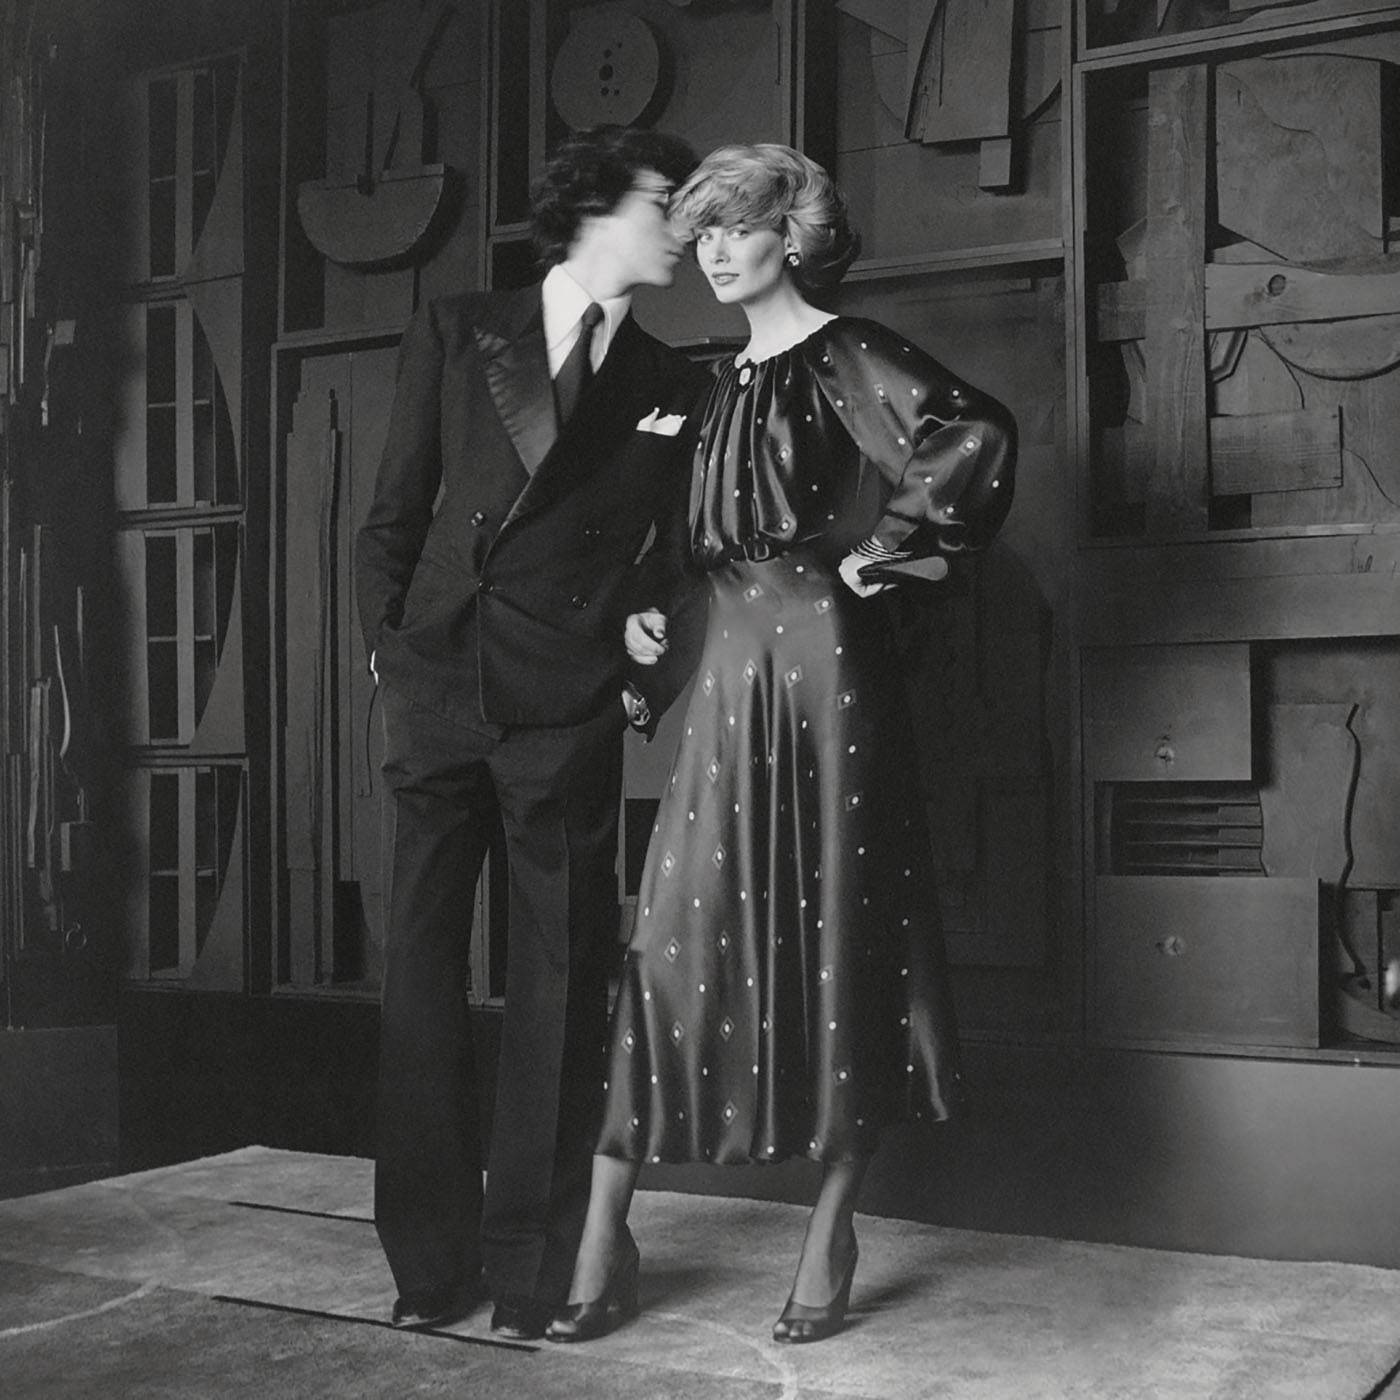 Francesco Scavullo, „Charly Stember standing with Yves Saint Laurent in front of Louise Nevelson sculpture”, Vogue, 1974 (© Condé Nast)